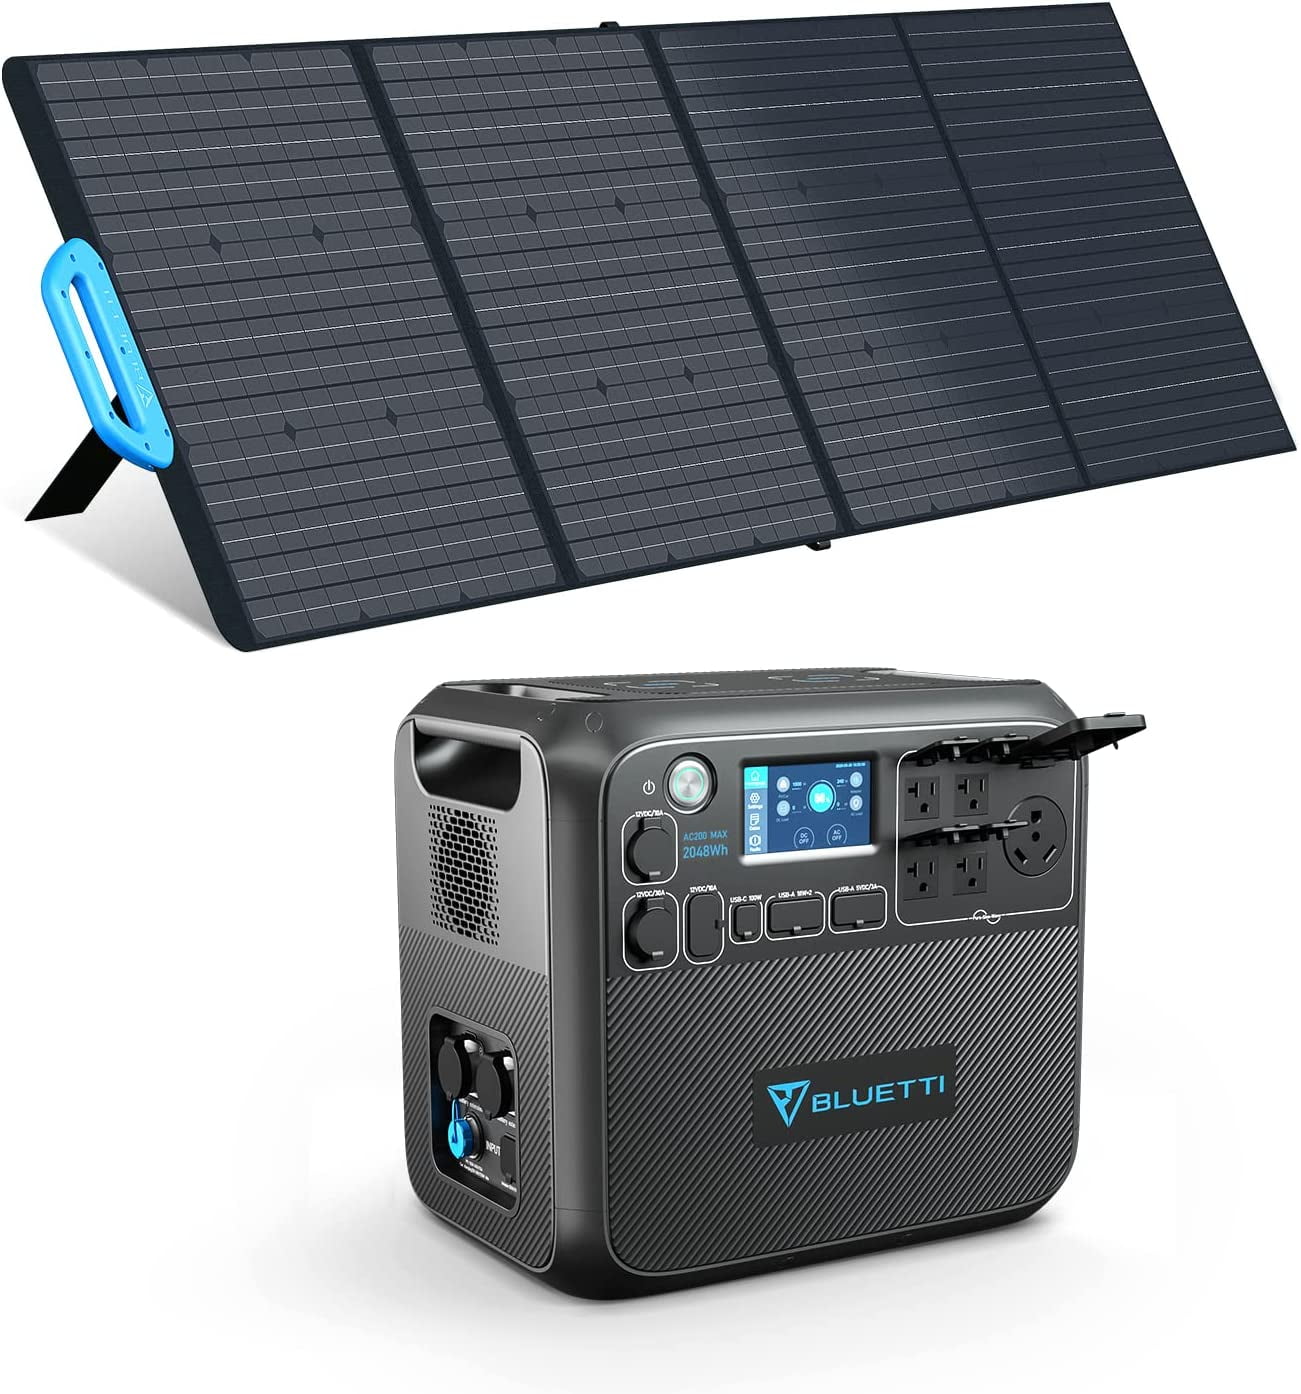 BLUETTI SP200 200w Solar Panel for  EB3A/AC180/AC70/EB70S/AC200MAX/AC300/AC200P/EB240 Power Station,Portable  Foldable Solar Panel Power Backup for